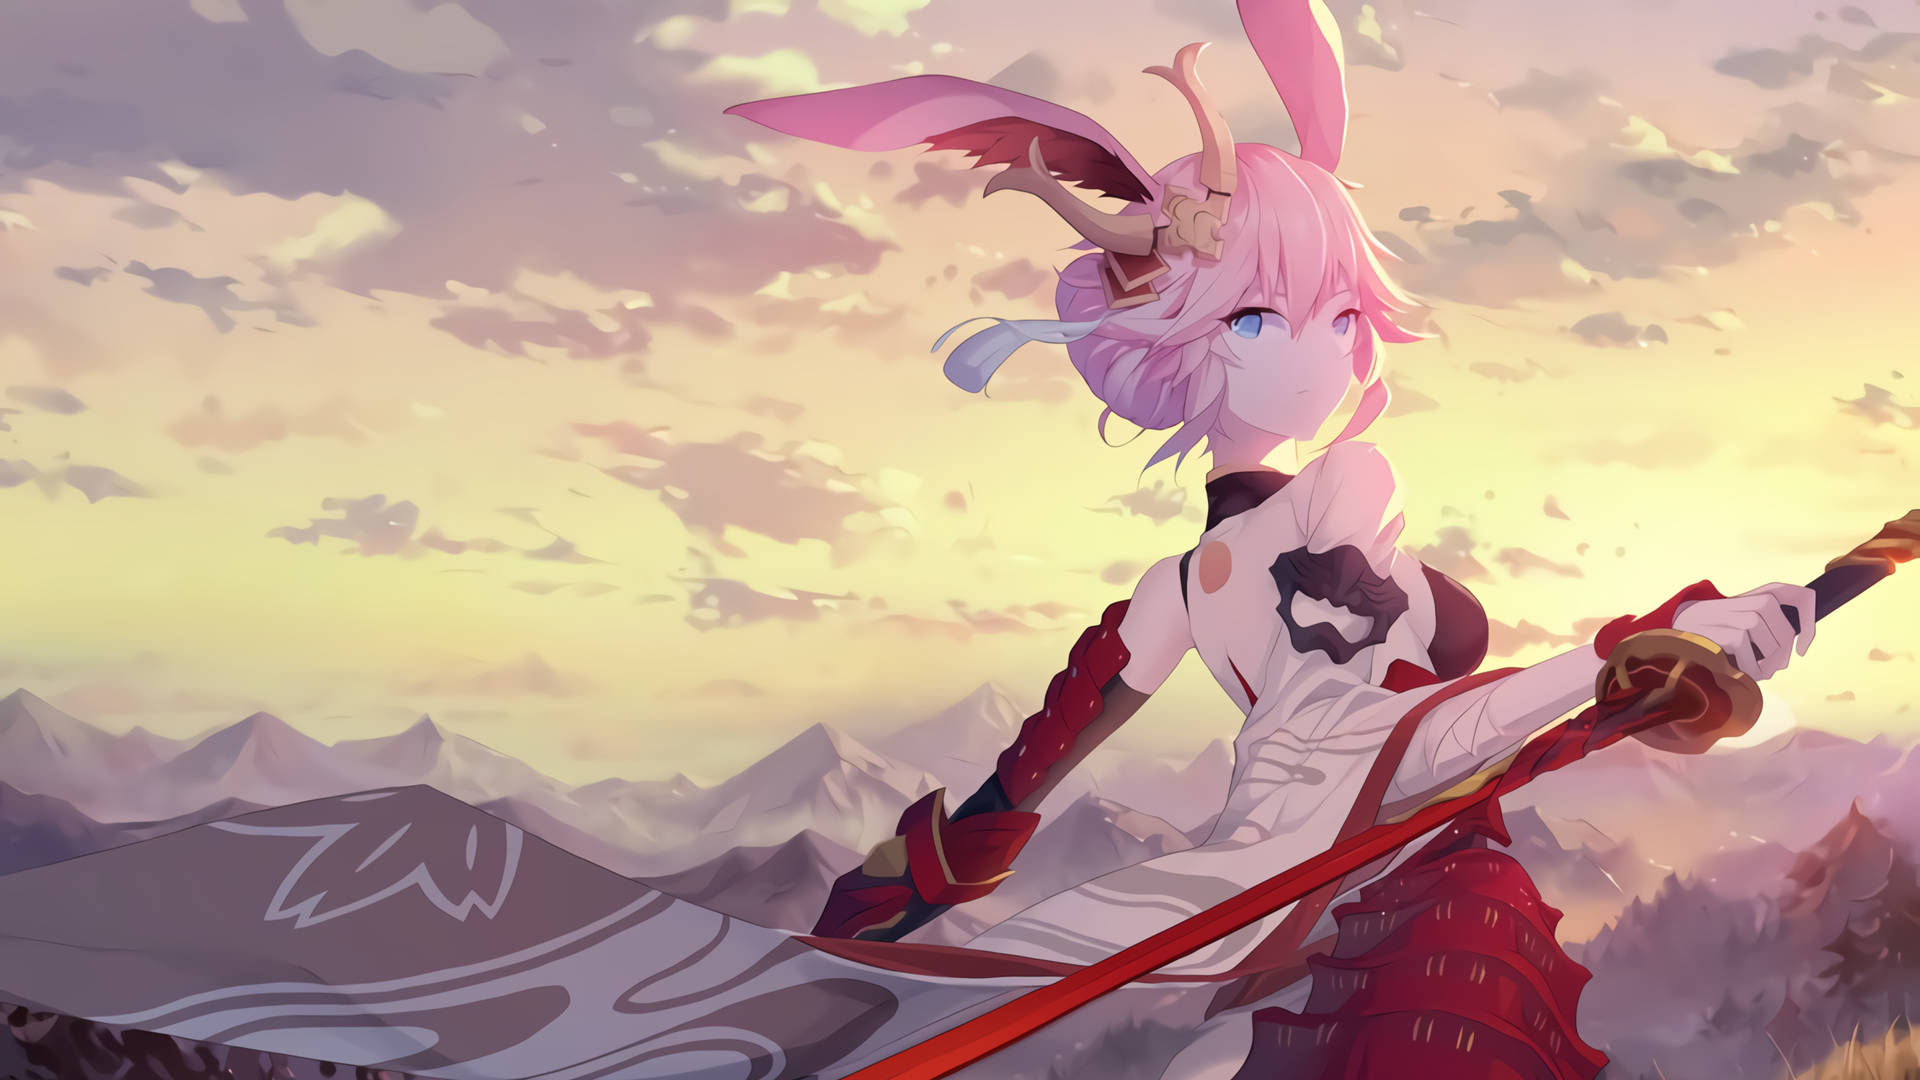 Cool Anime Bunny Girl With Sword Background